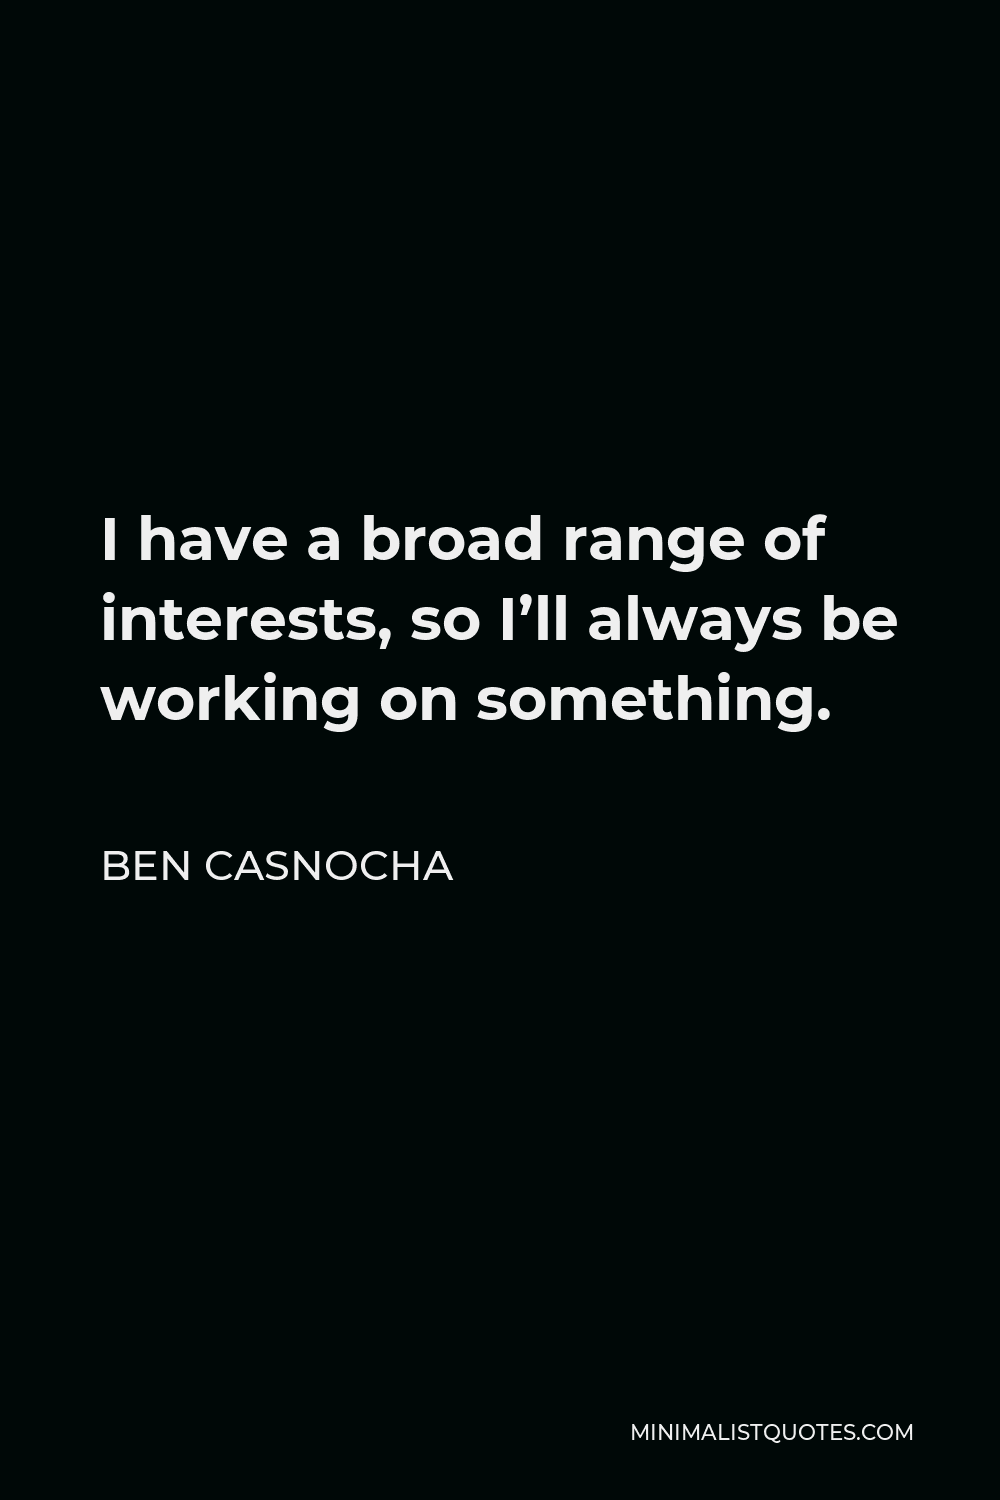 Ben Casnocha Quote - I have a broad range of interests, so I’ll always be working on something.